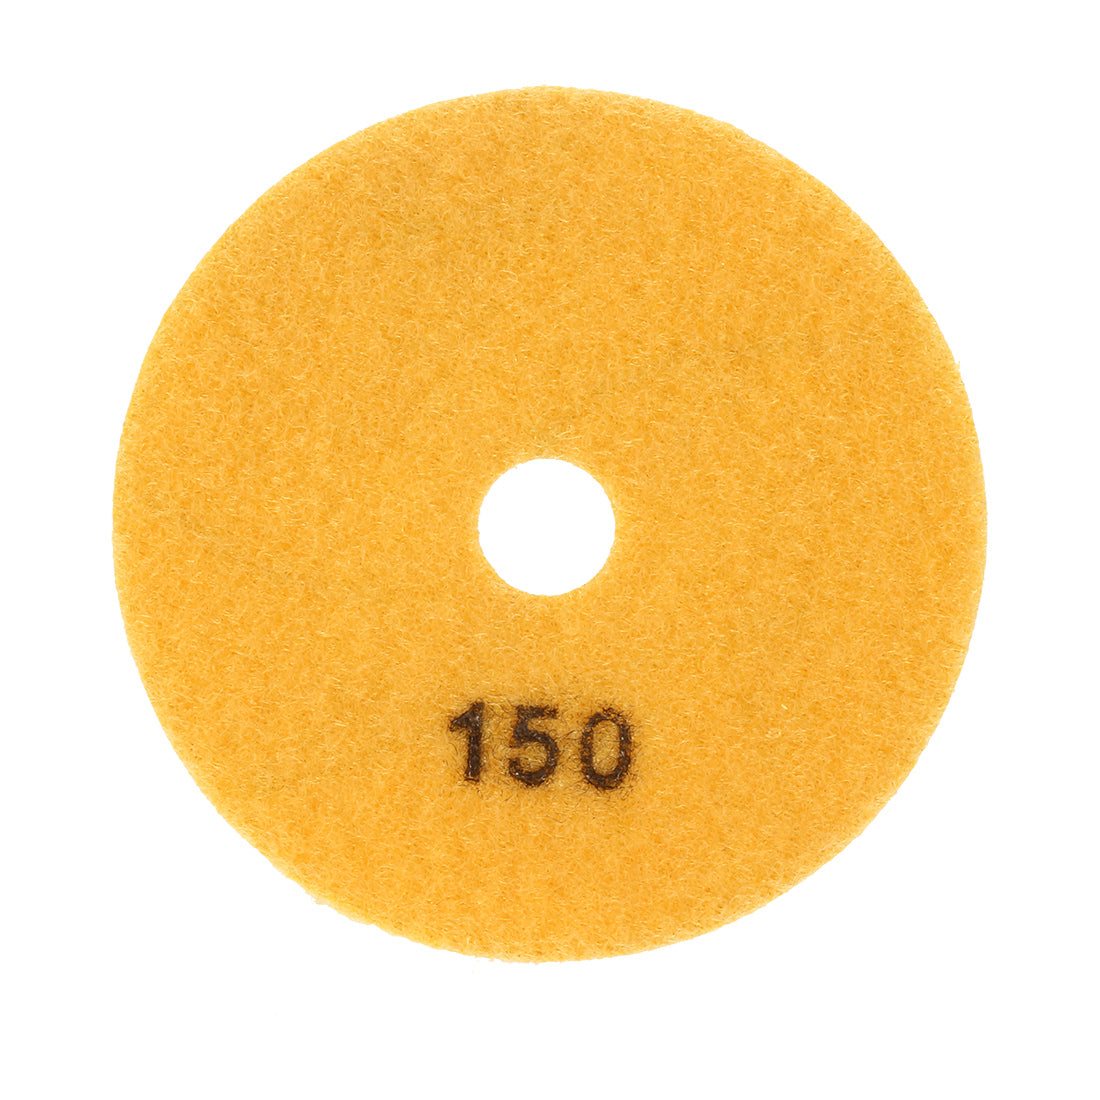 uxcell Uxcell 4" Diamond Wet Polishing Pad Disc Grit 150 10pcs for Granite Concrete Marble